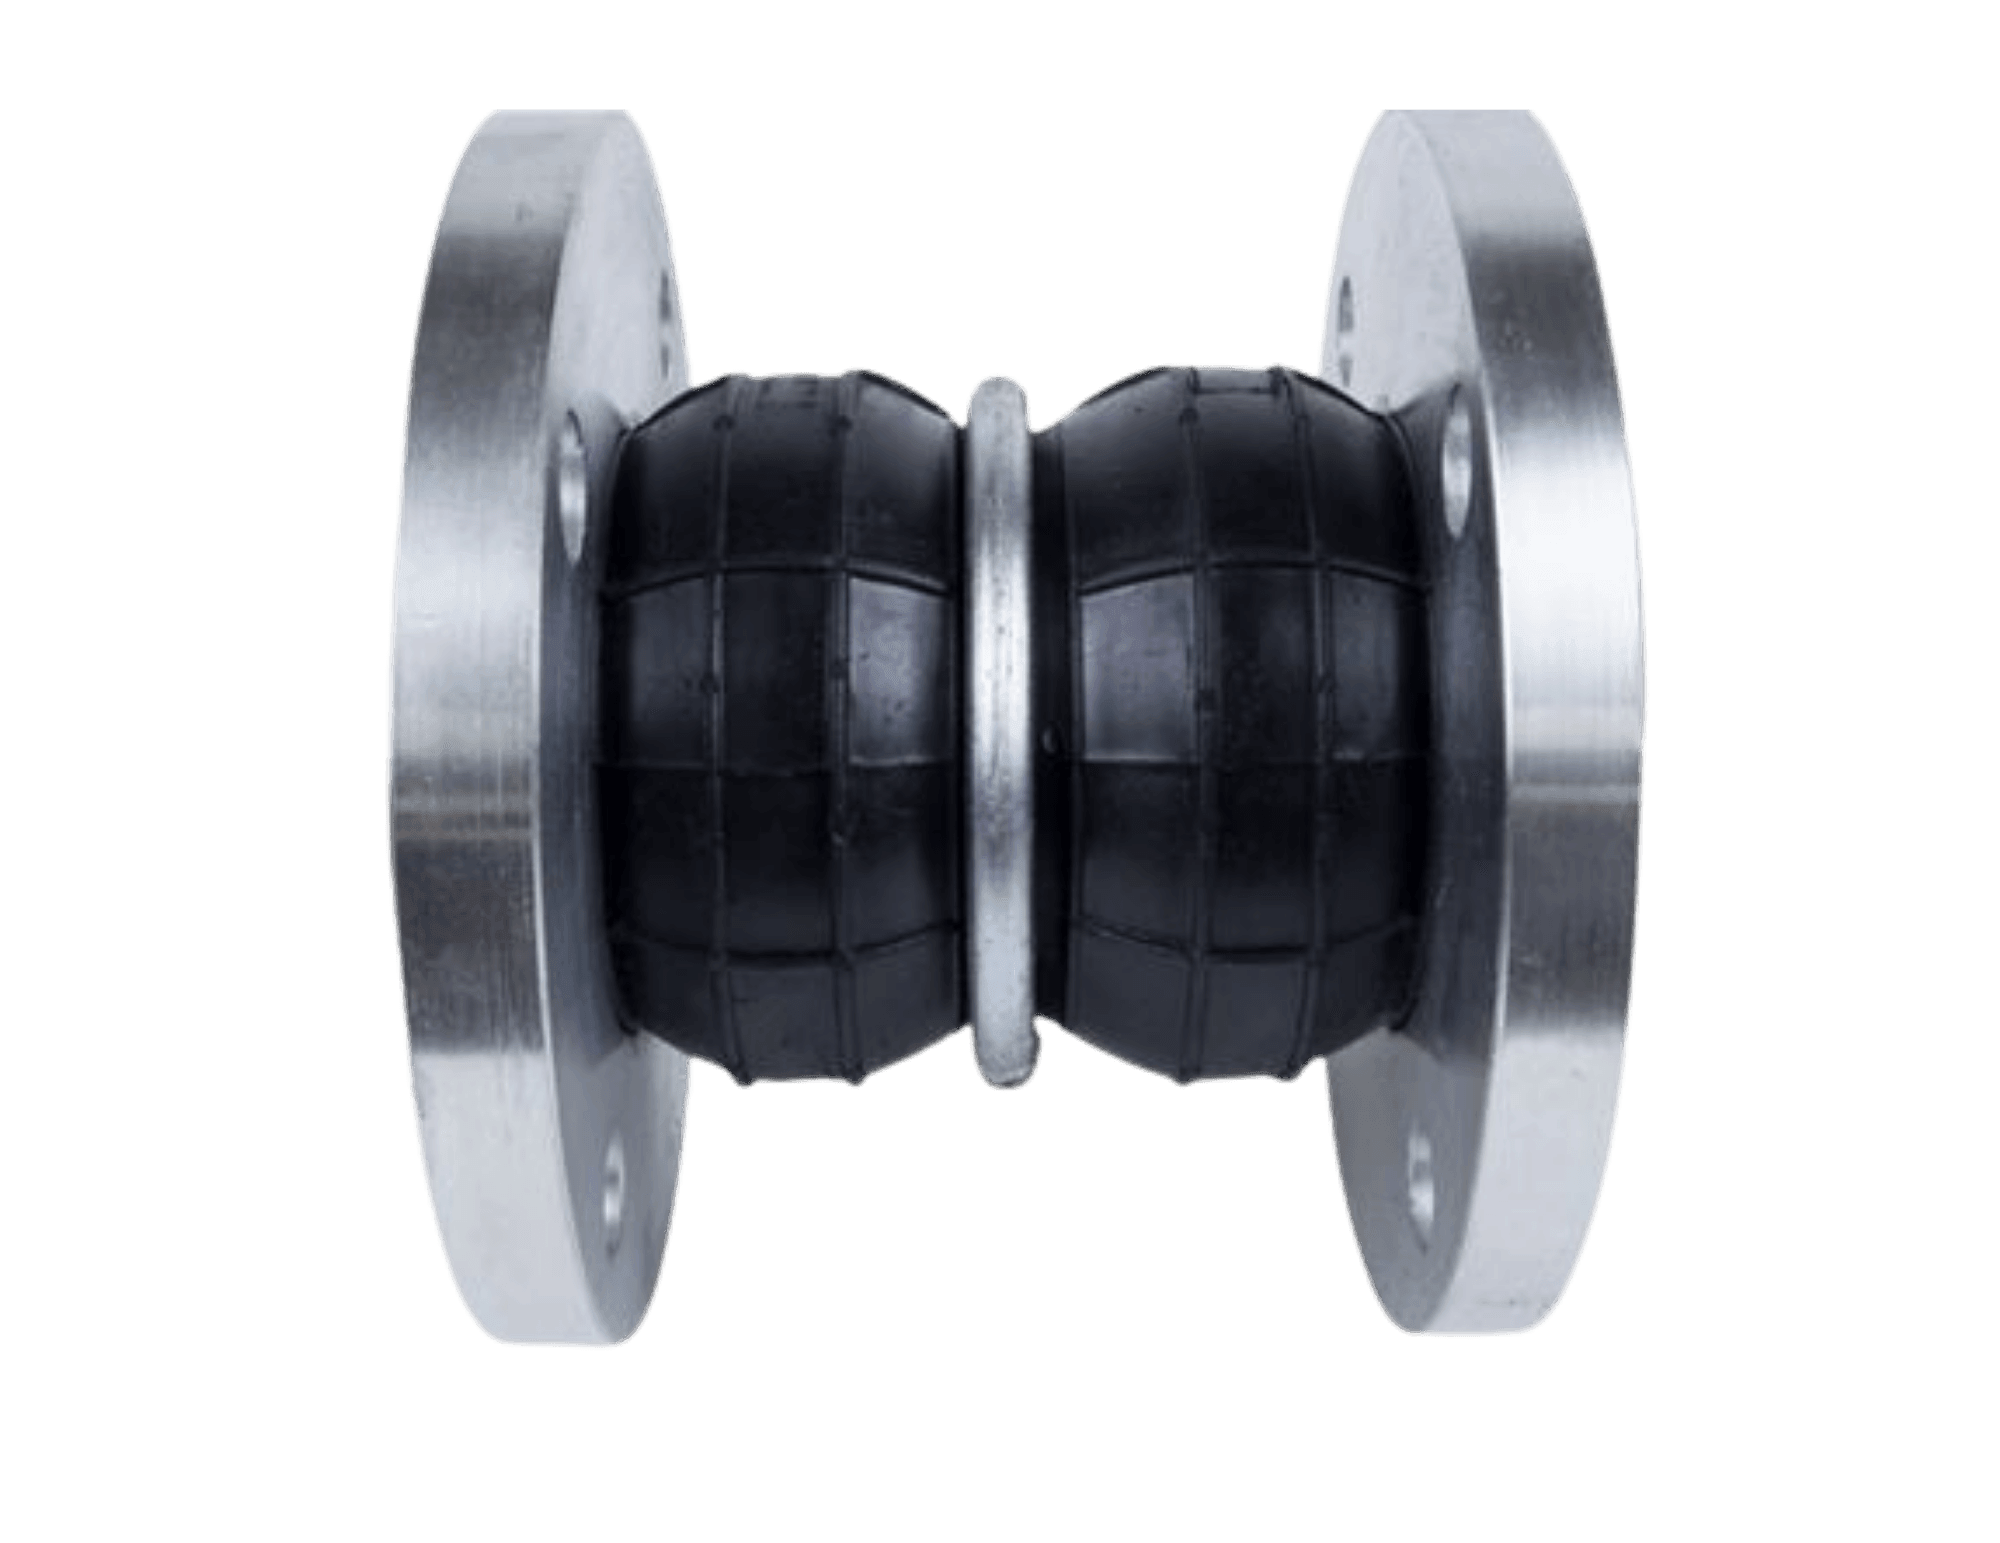 Double Sphere Rubber Expansion Joint 150 lb. Drilled Floating Flanges - Flex Pipe USA